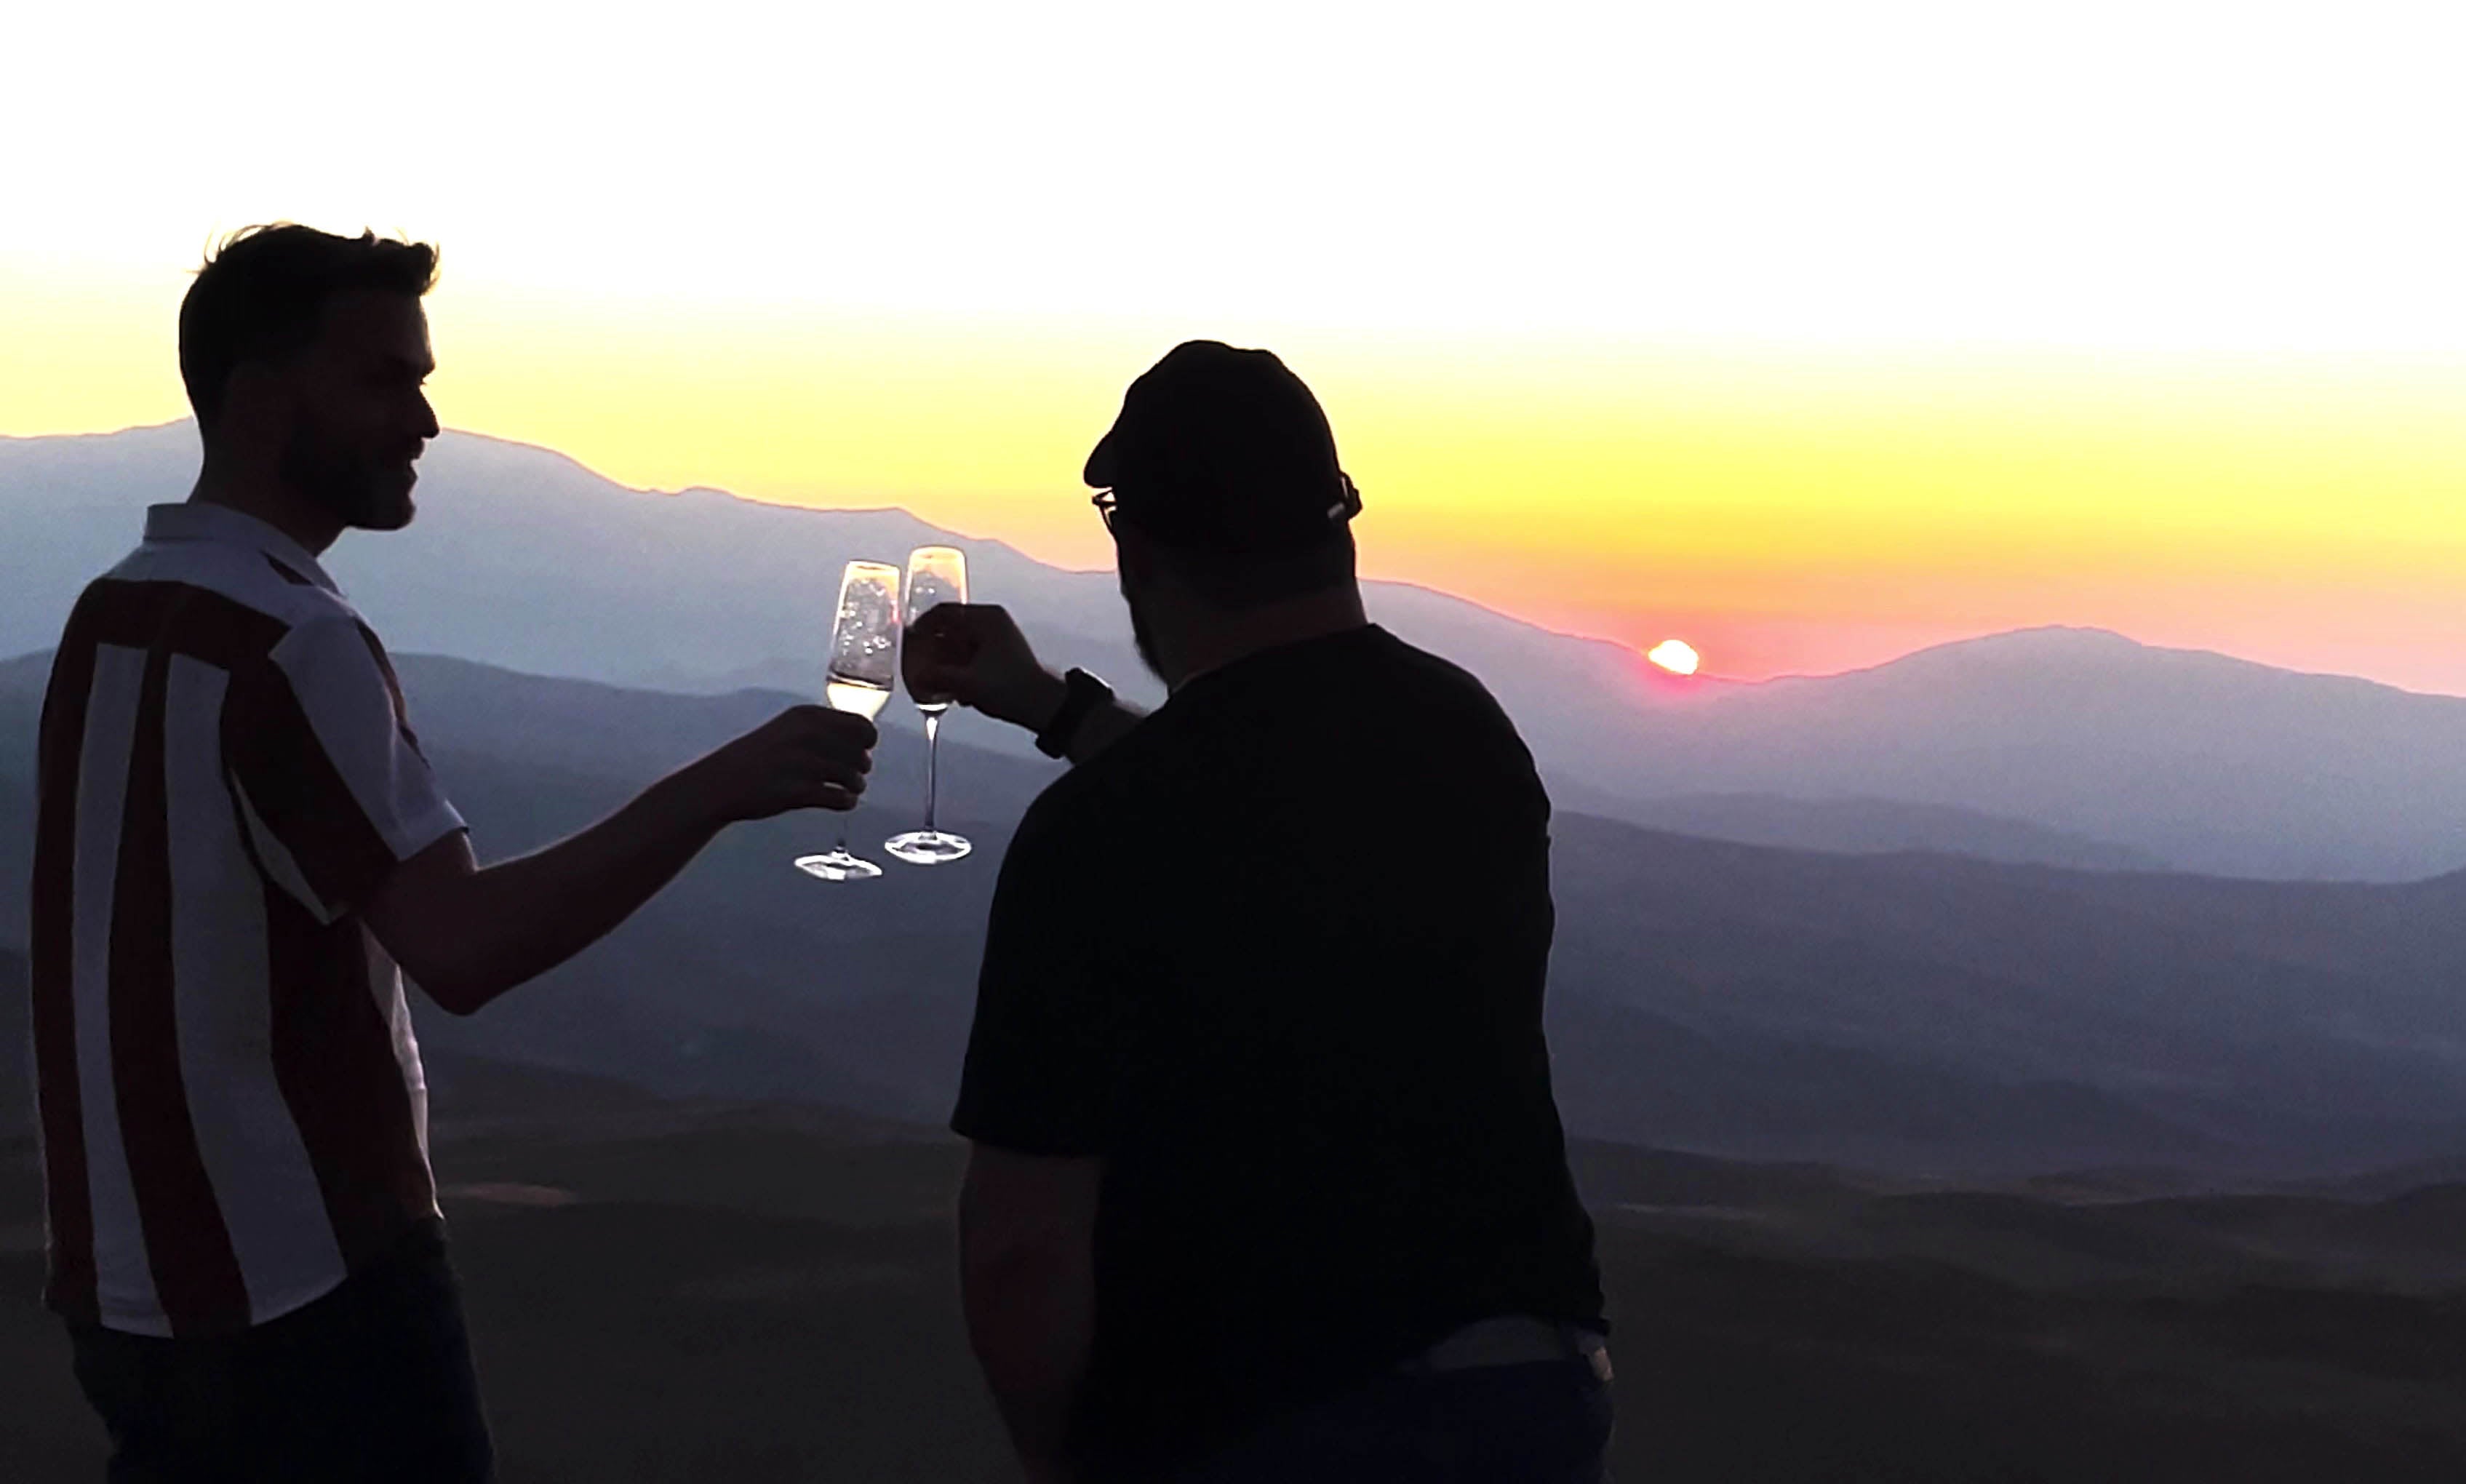 Andrew Allen and Xavier with an Andes Mountain sunset.